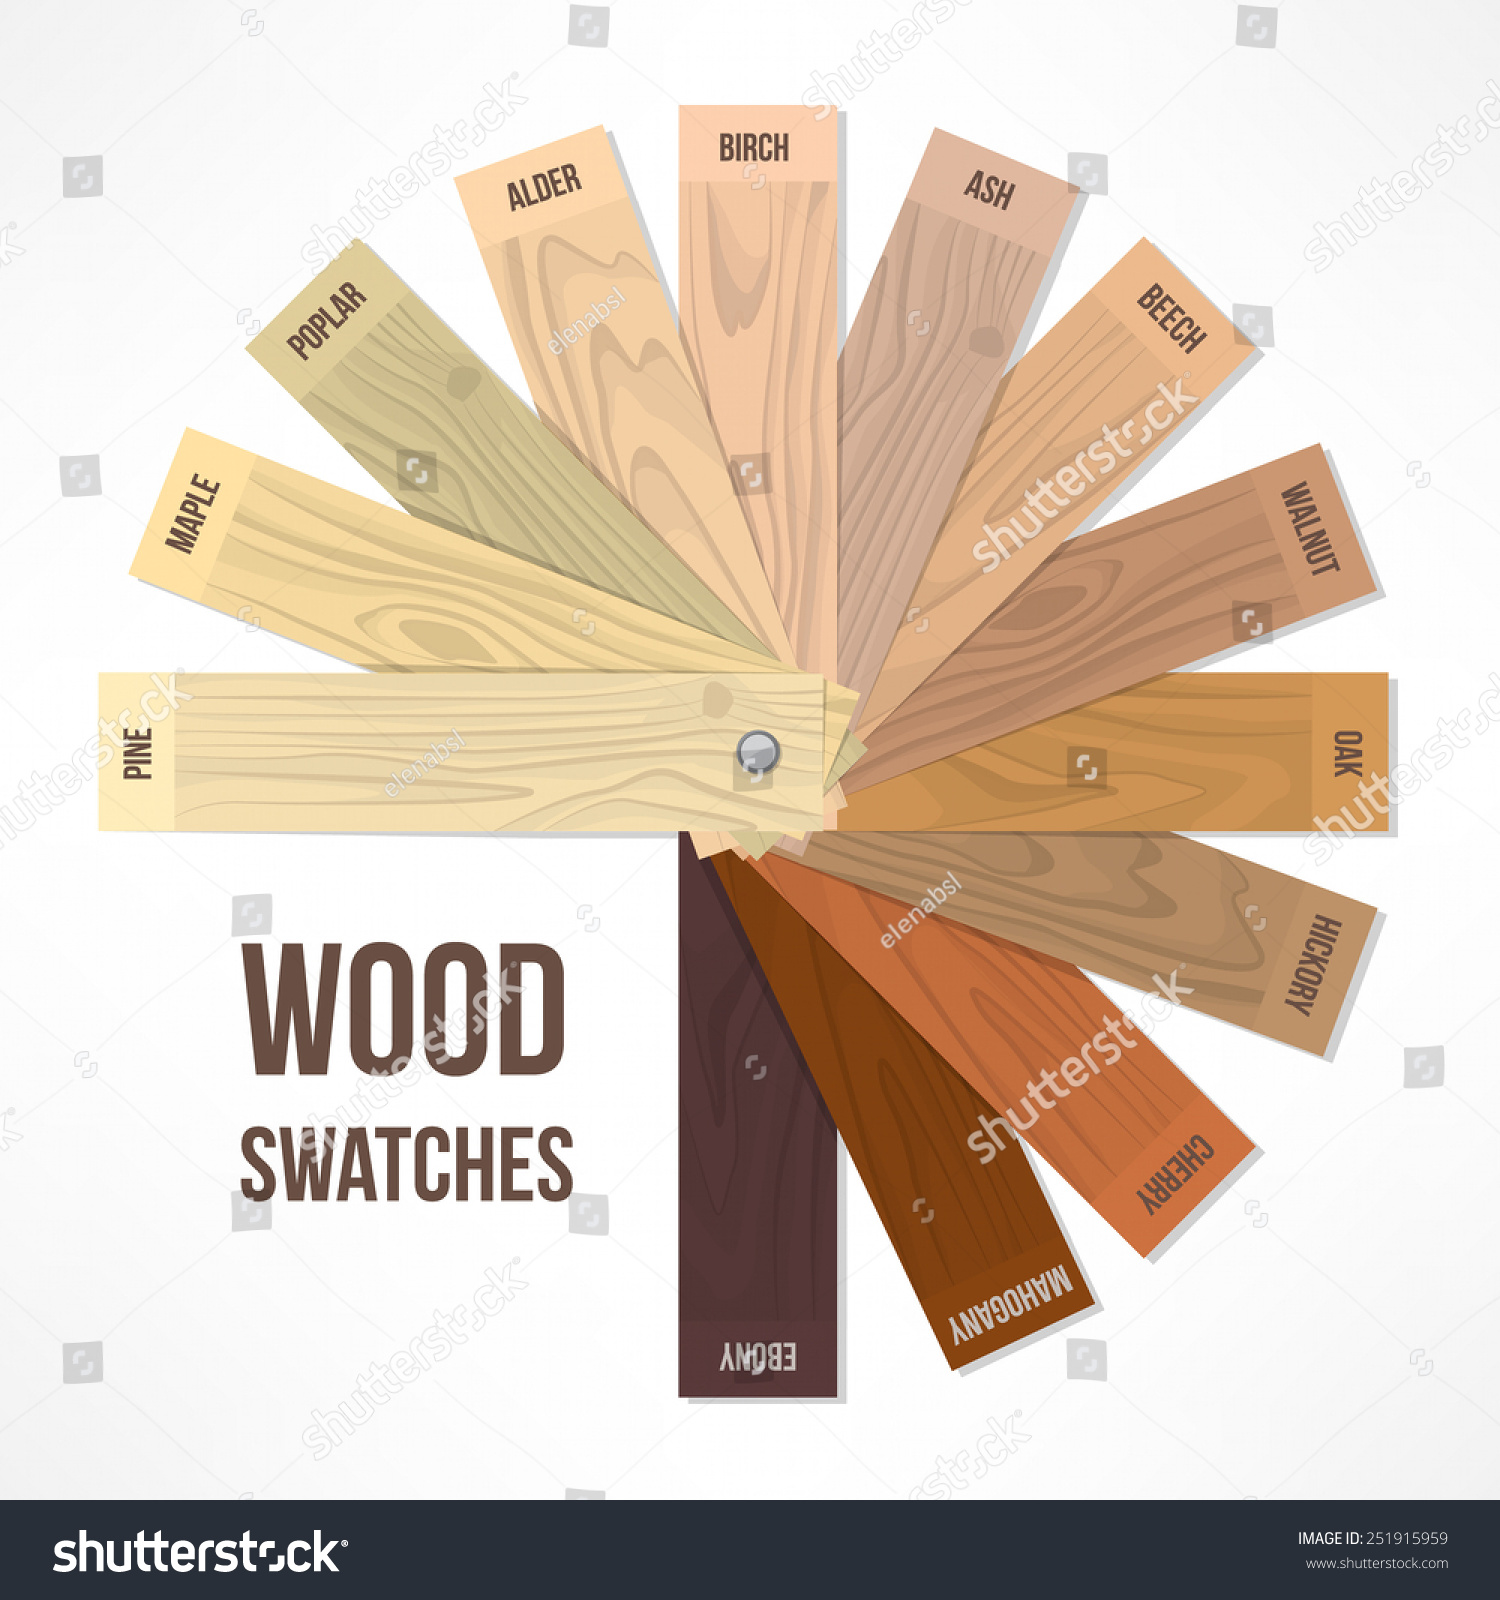 wood swatches illustrator download